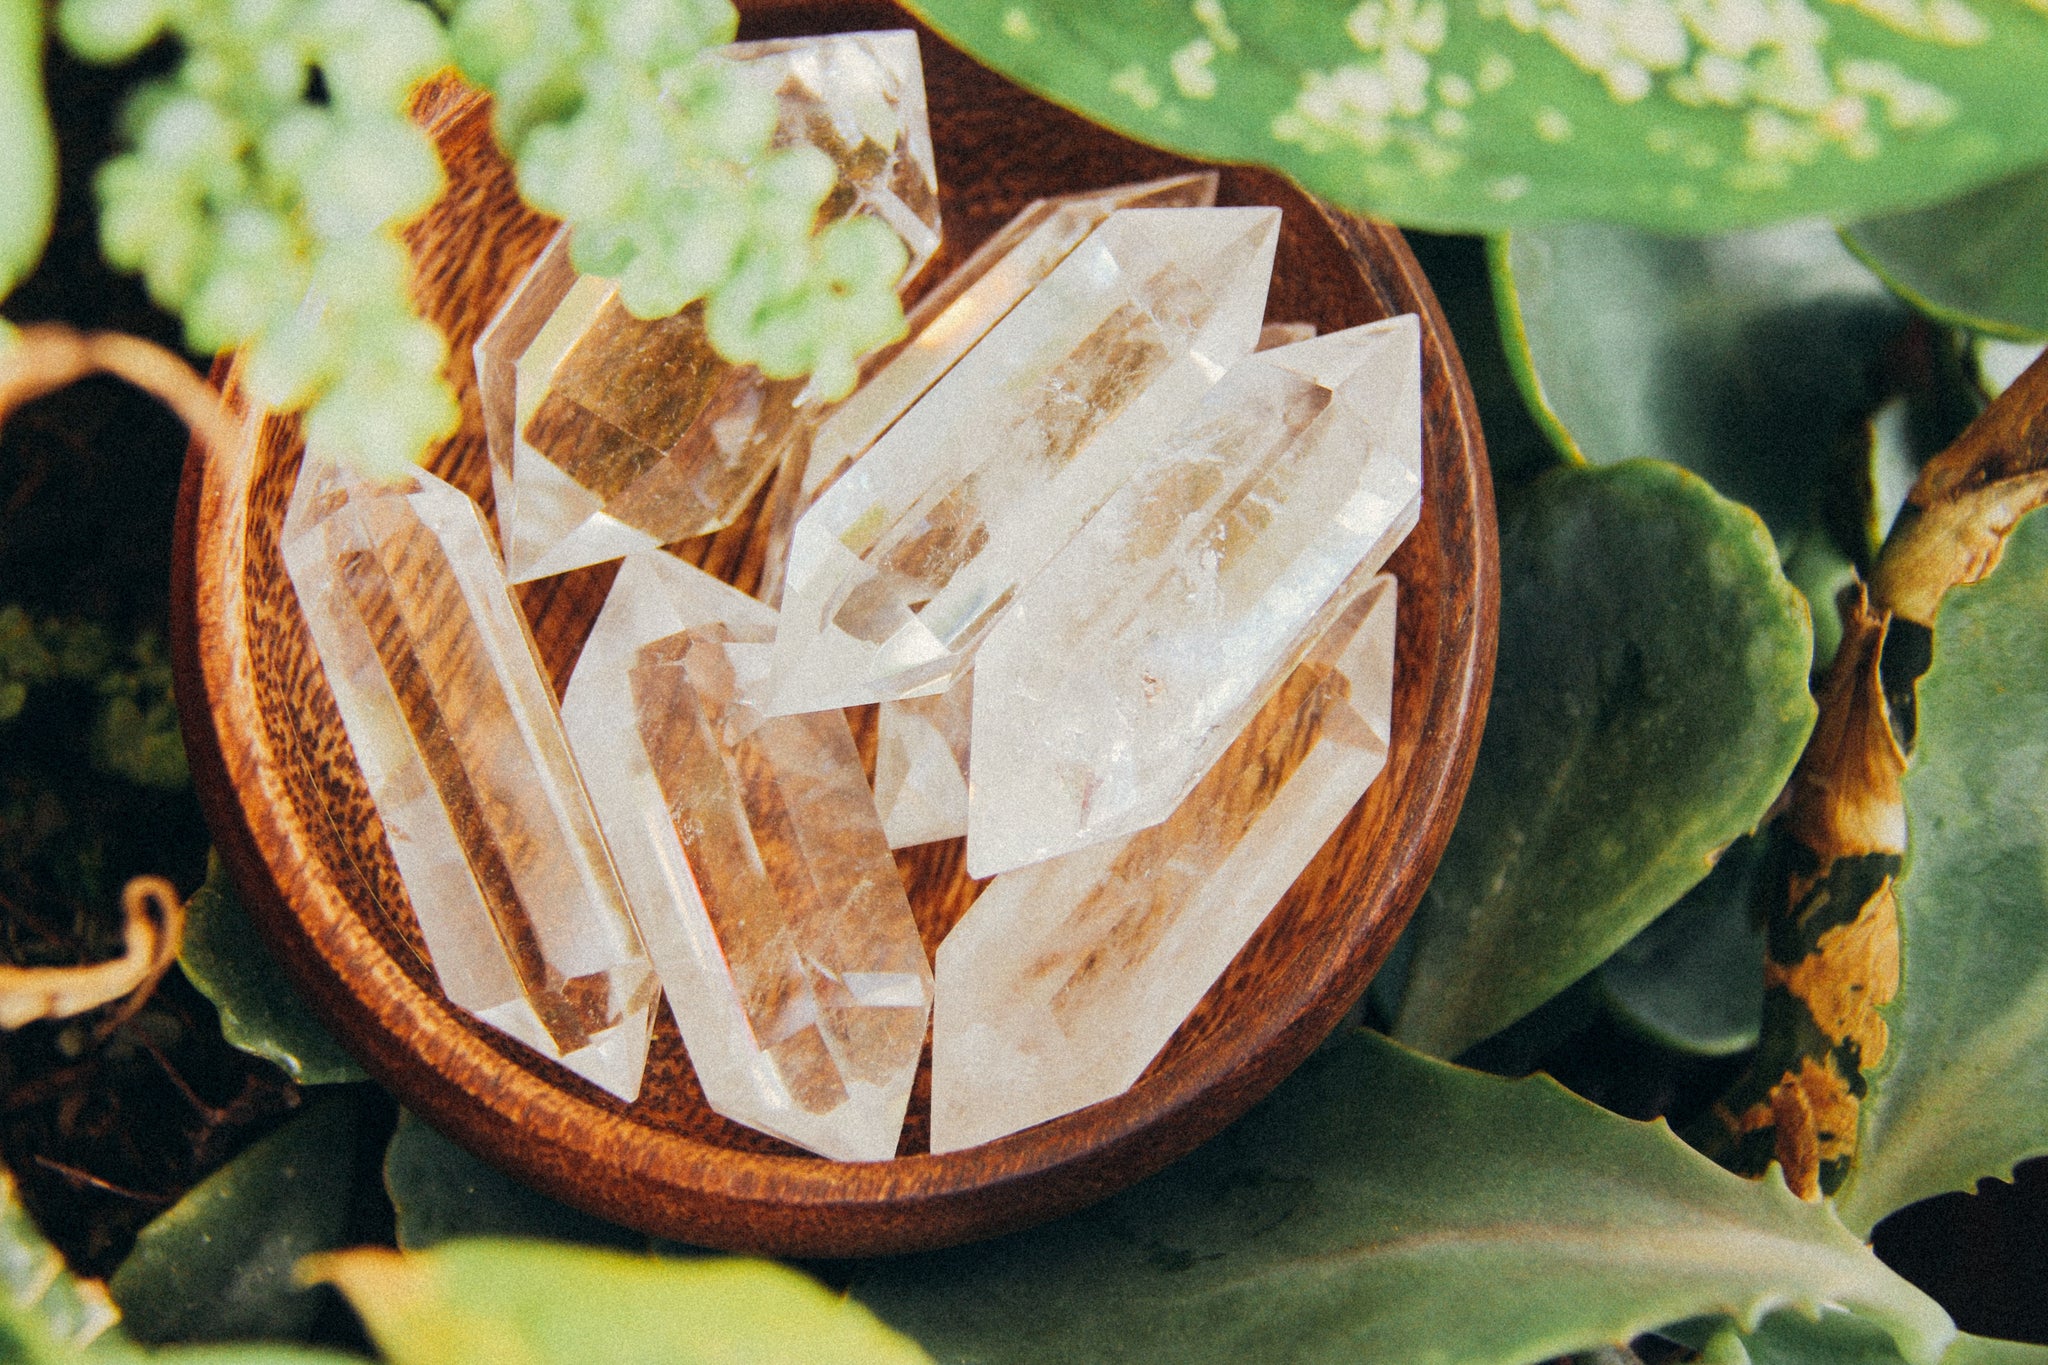 What do crystals do and why are Long Islanders seeking them out?